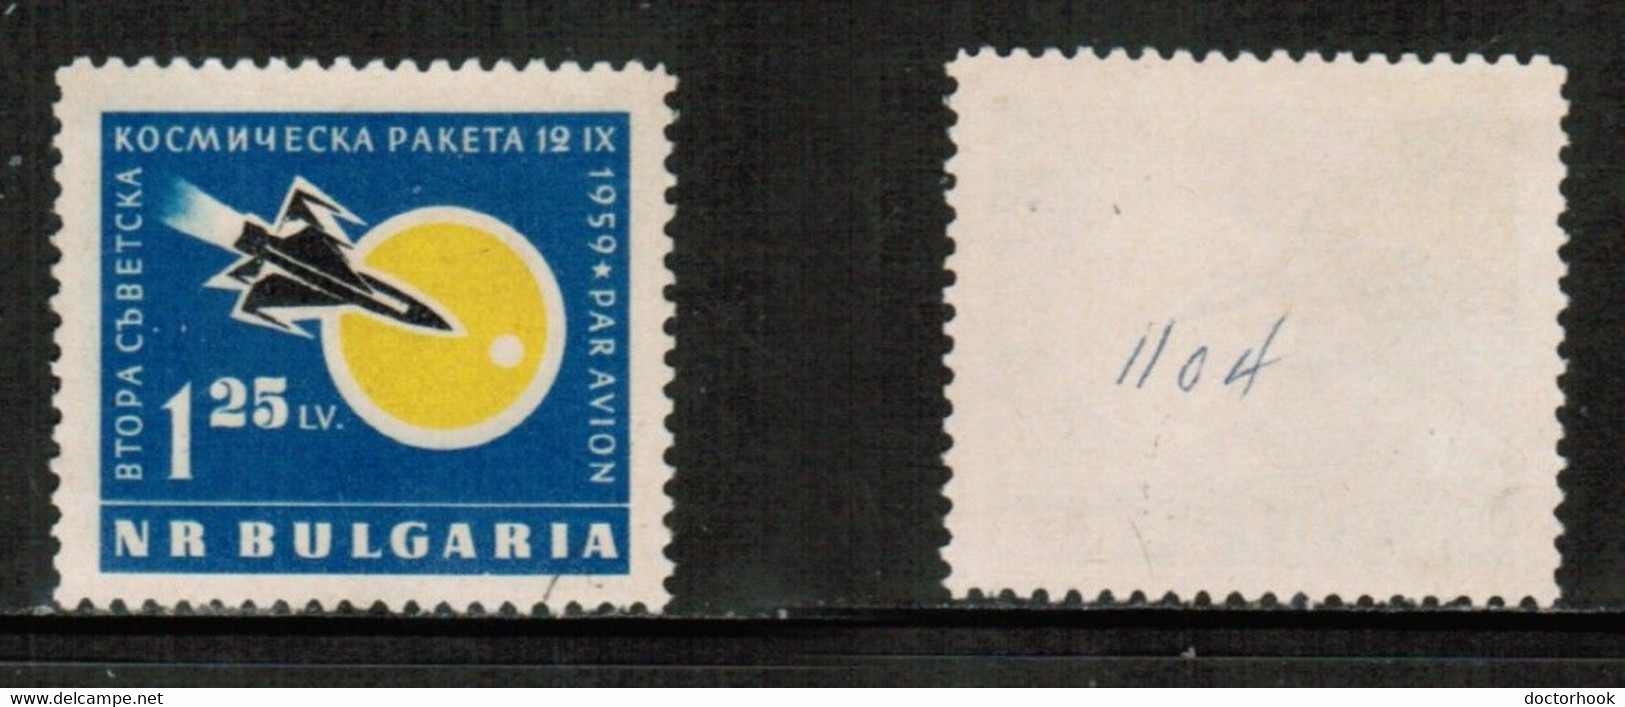 BULGARIA   Scott # C 79 USED (CONDITION AS PER SCAN) (Stamp Scan # 878-6) - Poste Aérienne